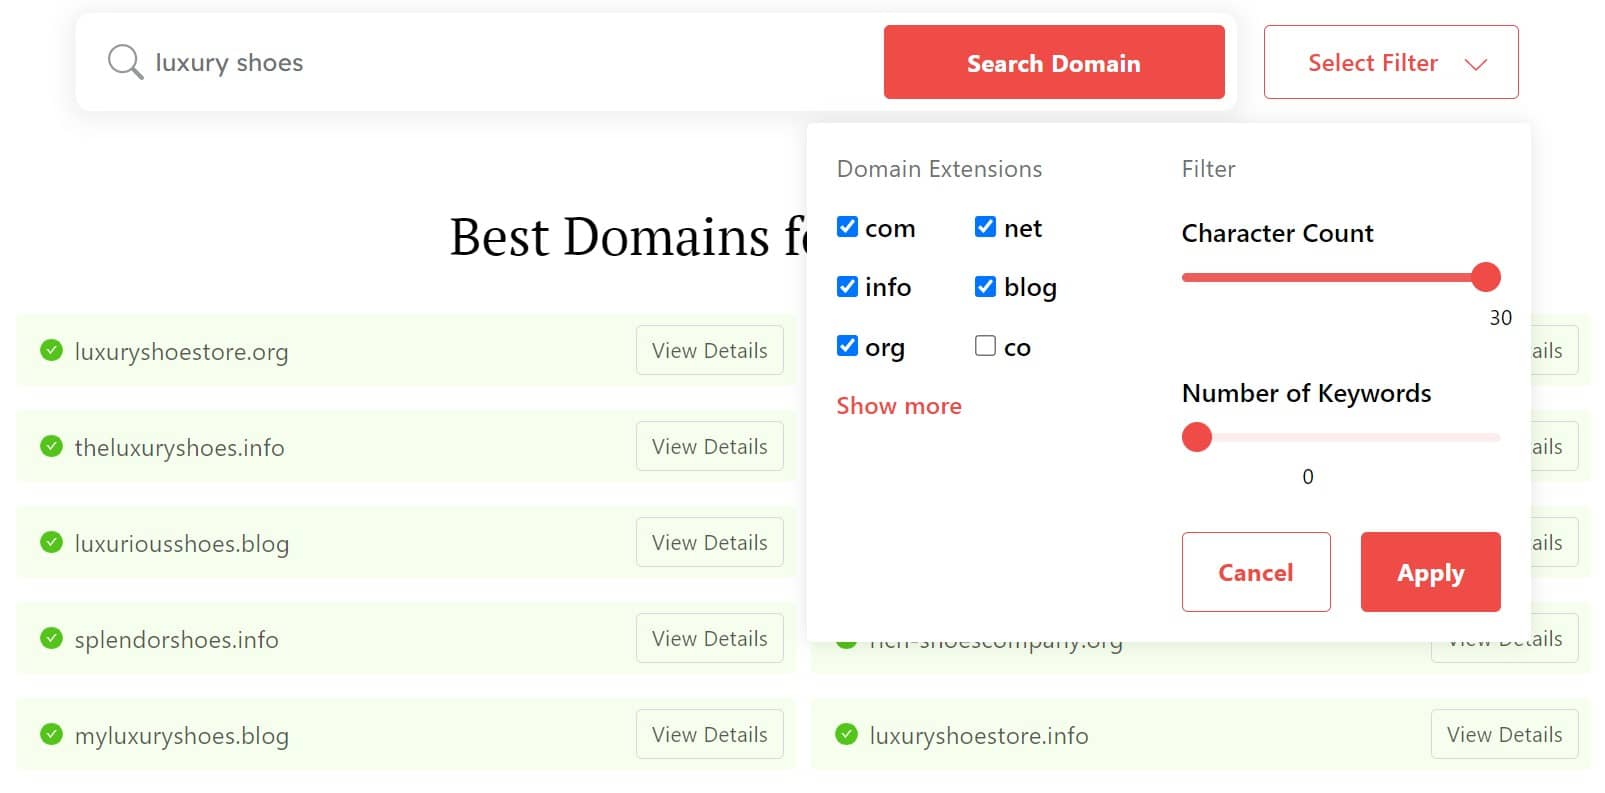 DomainWheel shoe company names generator search filter domain extensions, character count, and number of keywords